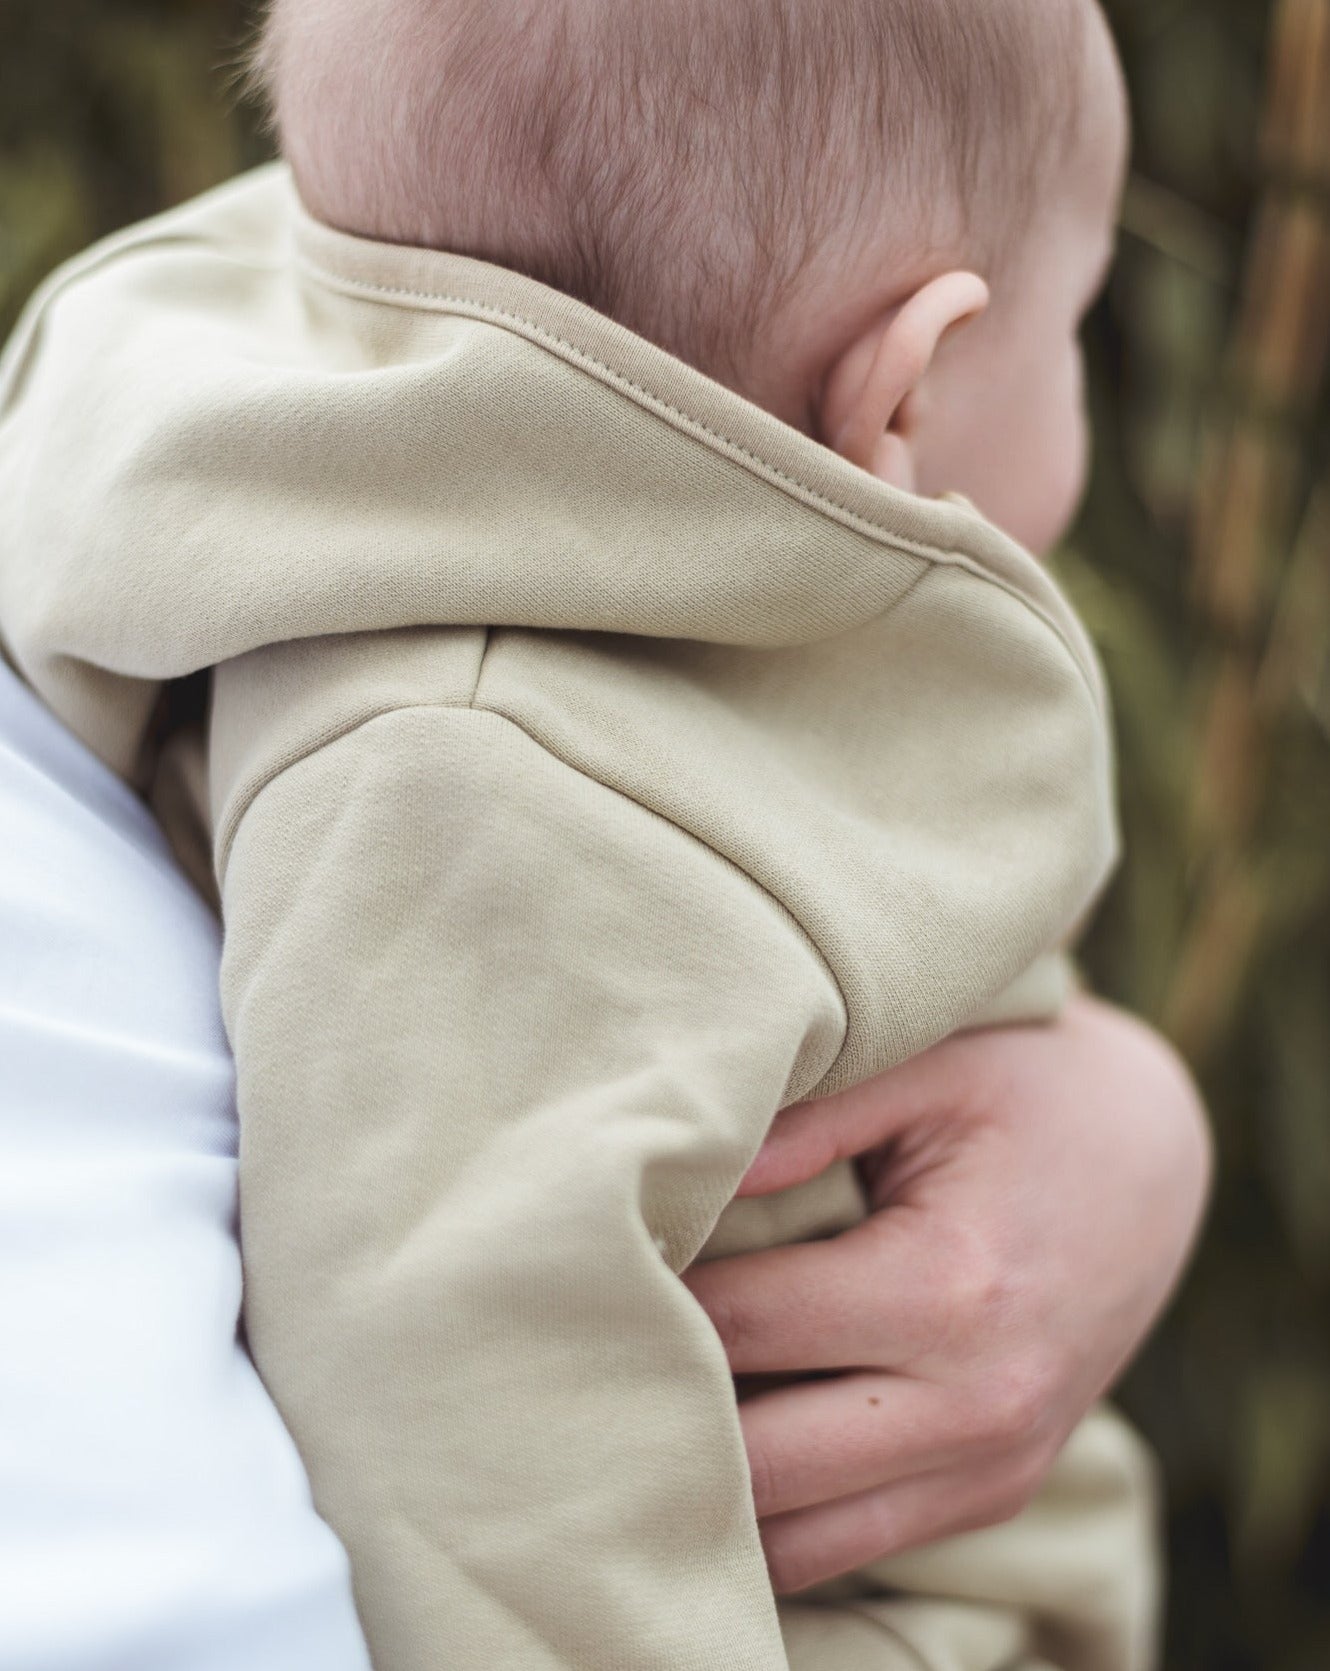 Beige overall with zipper and hoodie. Made of the softest brushed organic cotton jersey.